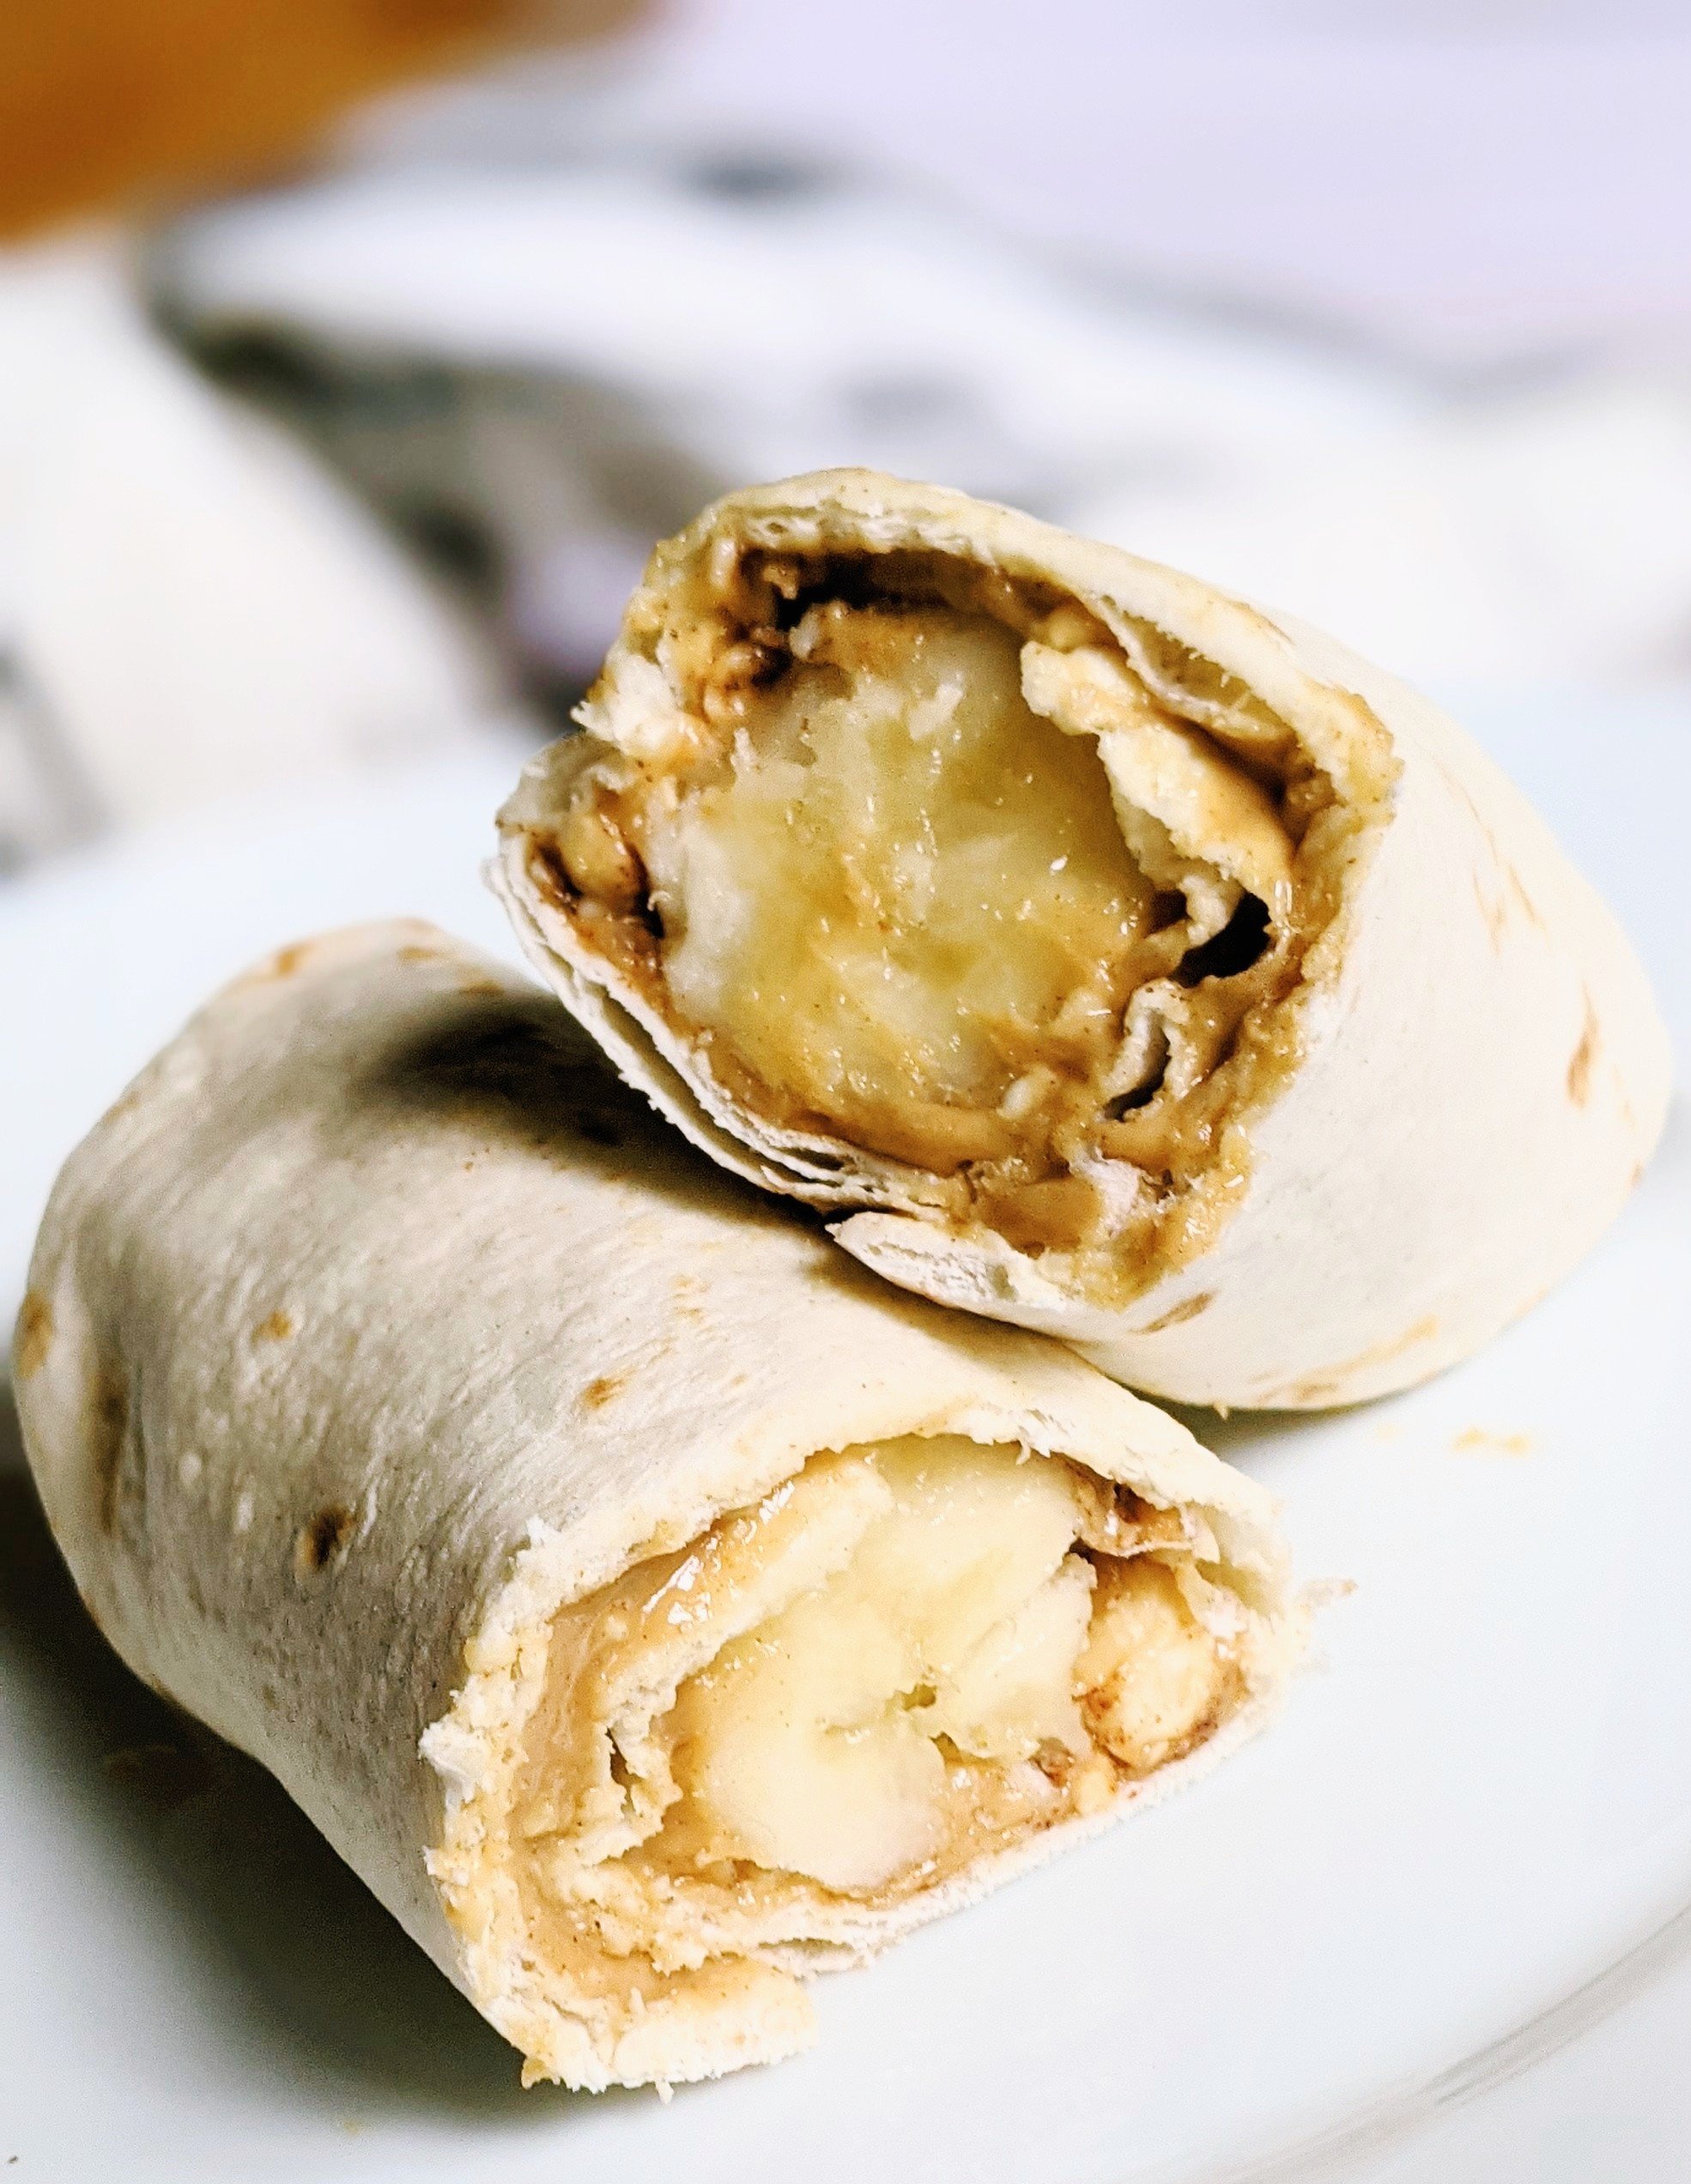 banana tortilla wrap vegan gluten free healthy snack recipes for kids and adults in between meetings